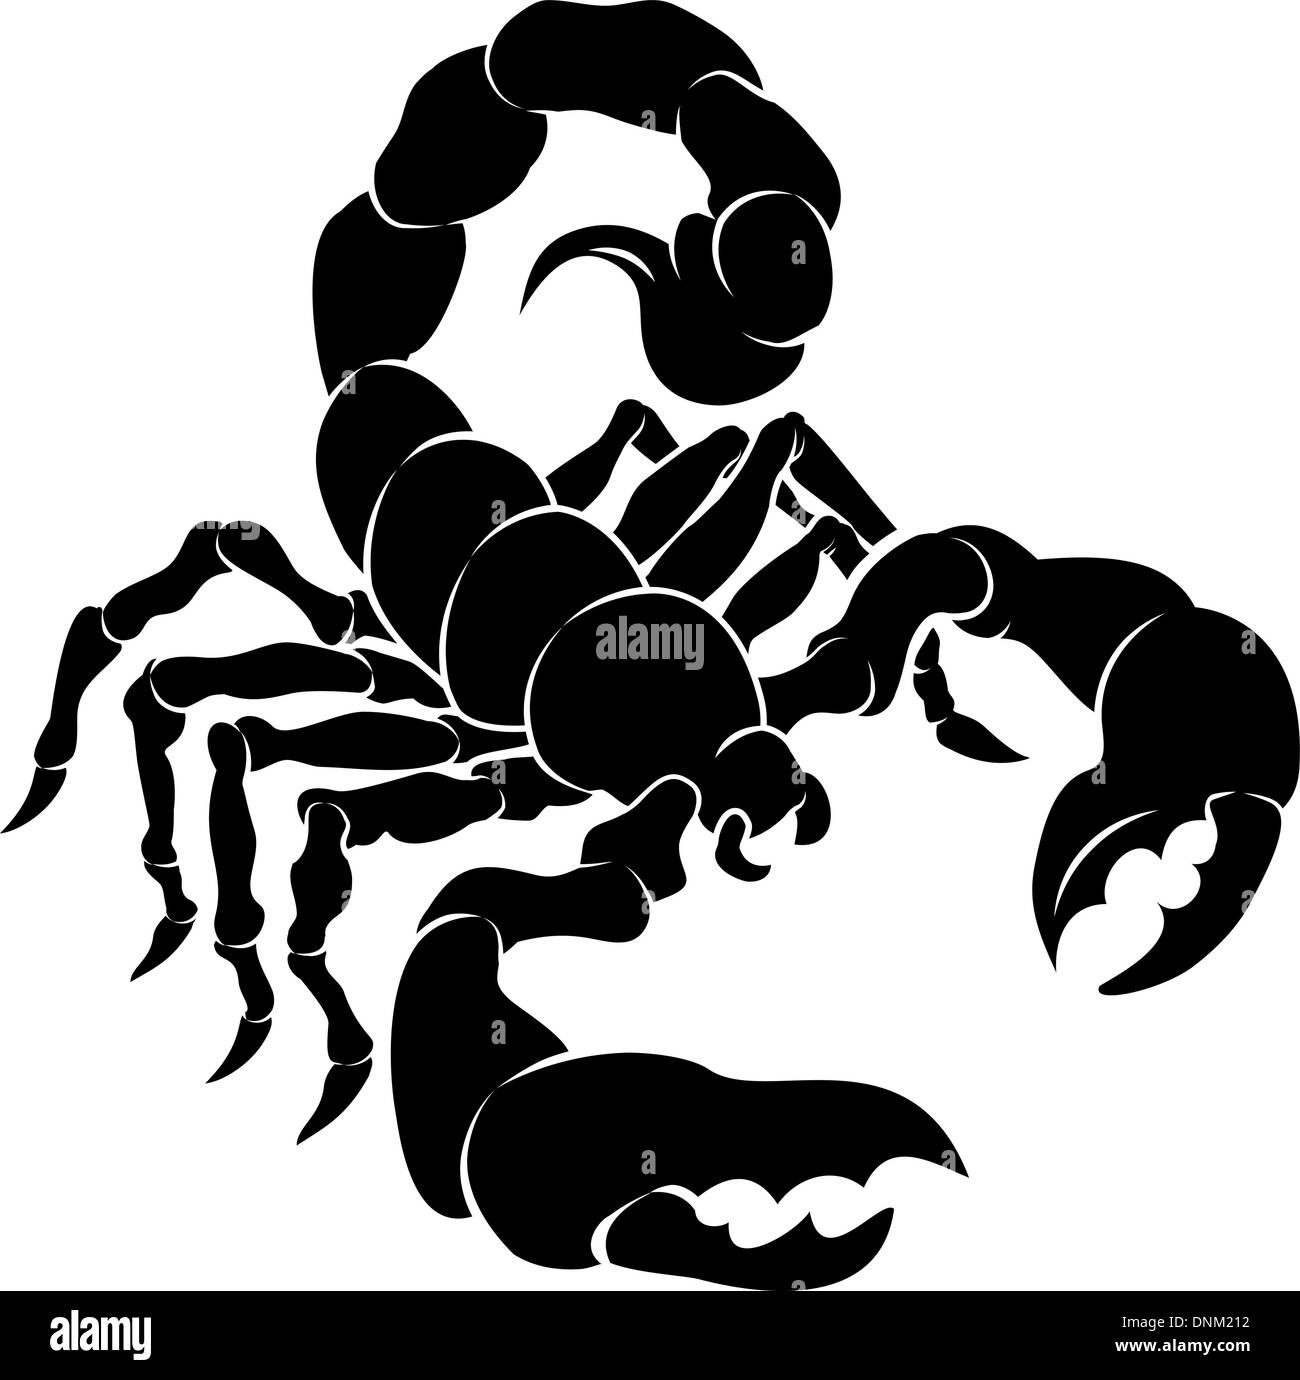 Scorpion tattoo vector vectors Black and White Stock Photos & Images - Alamy